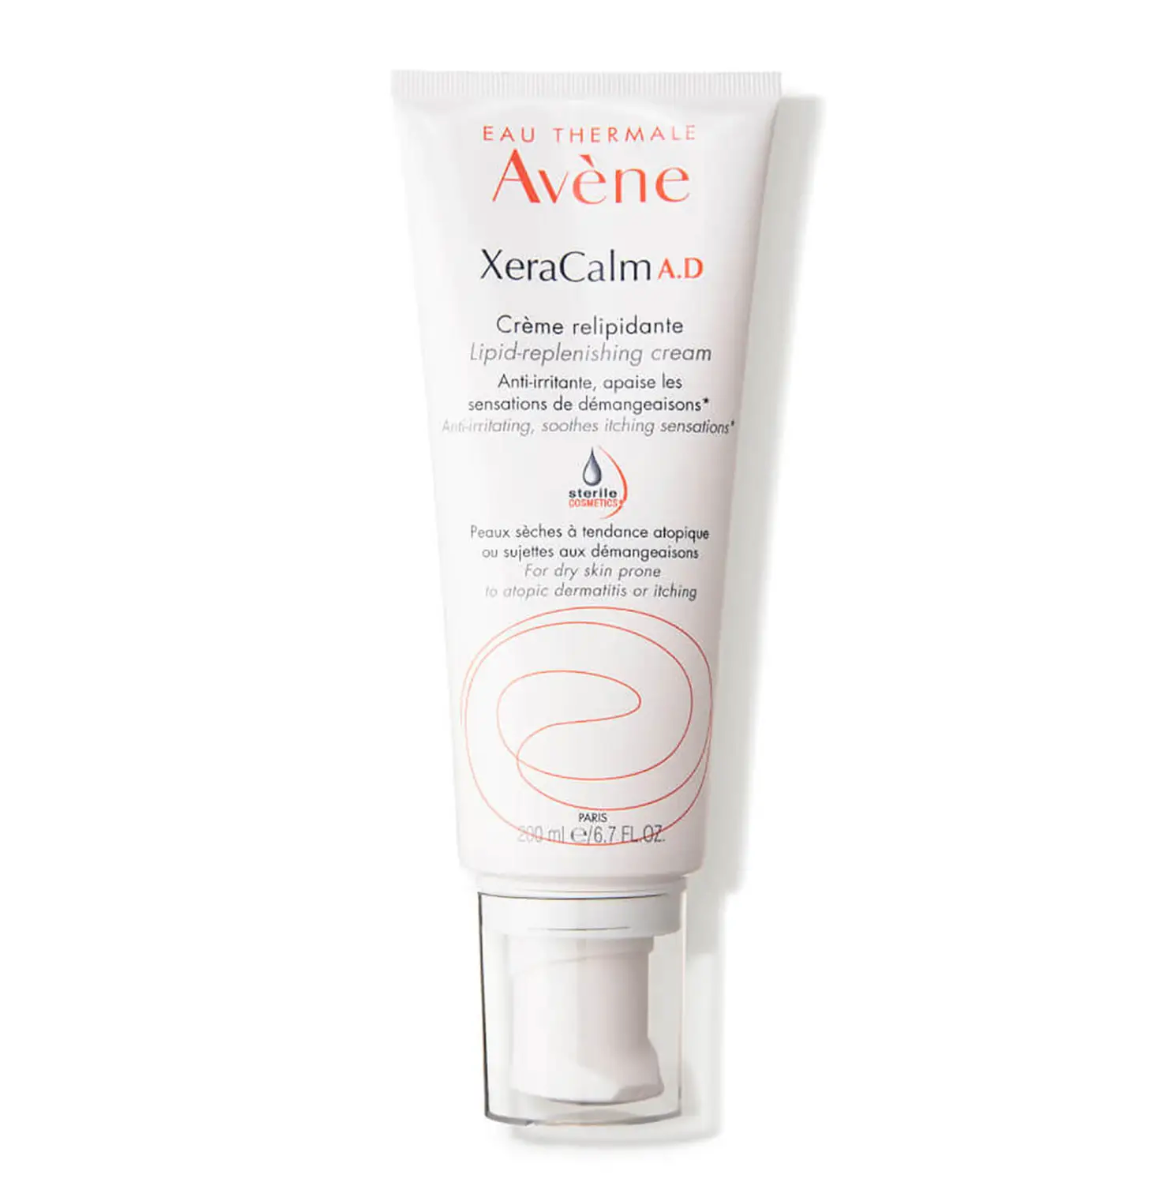 This Avène La Mer Dupe Is On Sale for Black Friday